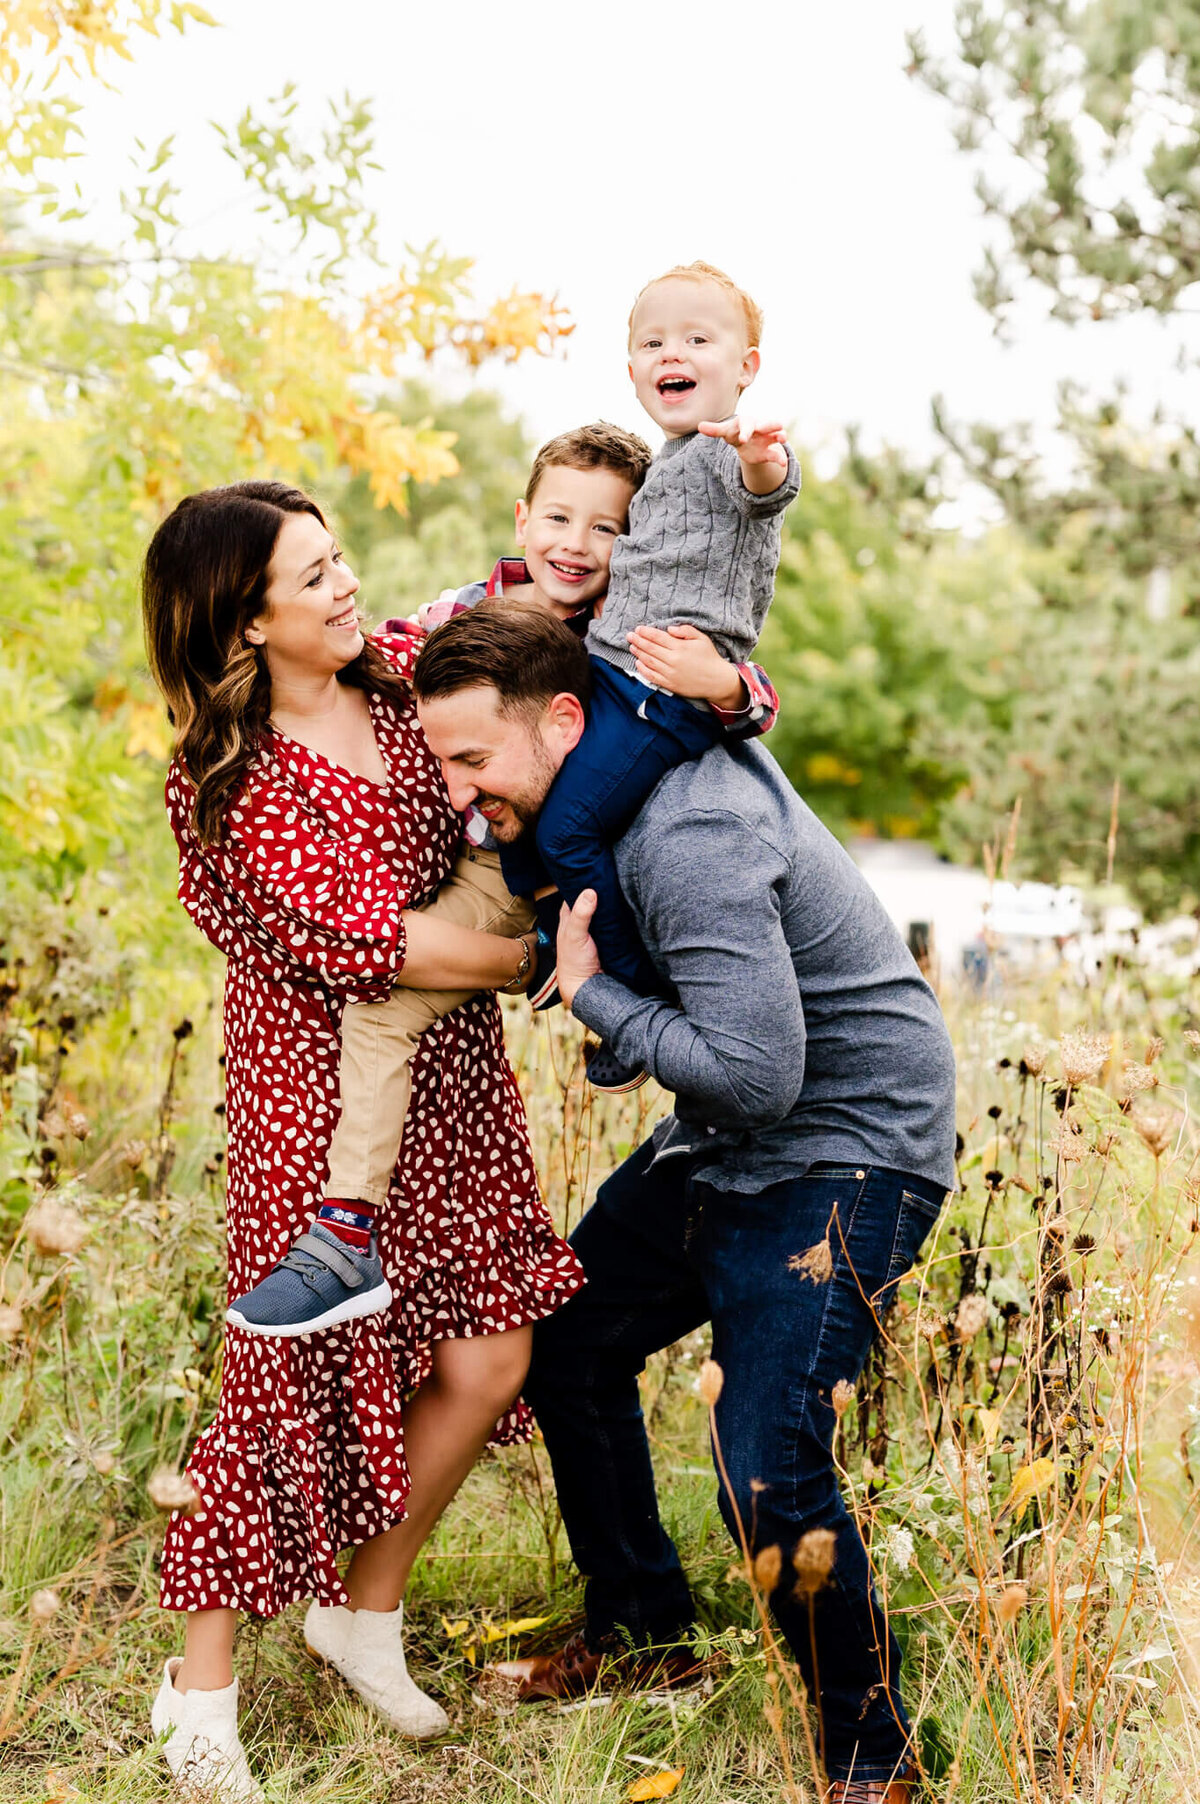 Fun and playful photo of family with kid on dad's shoulders during their family session at Eldridge Park.